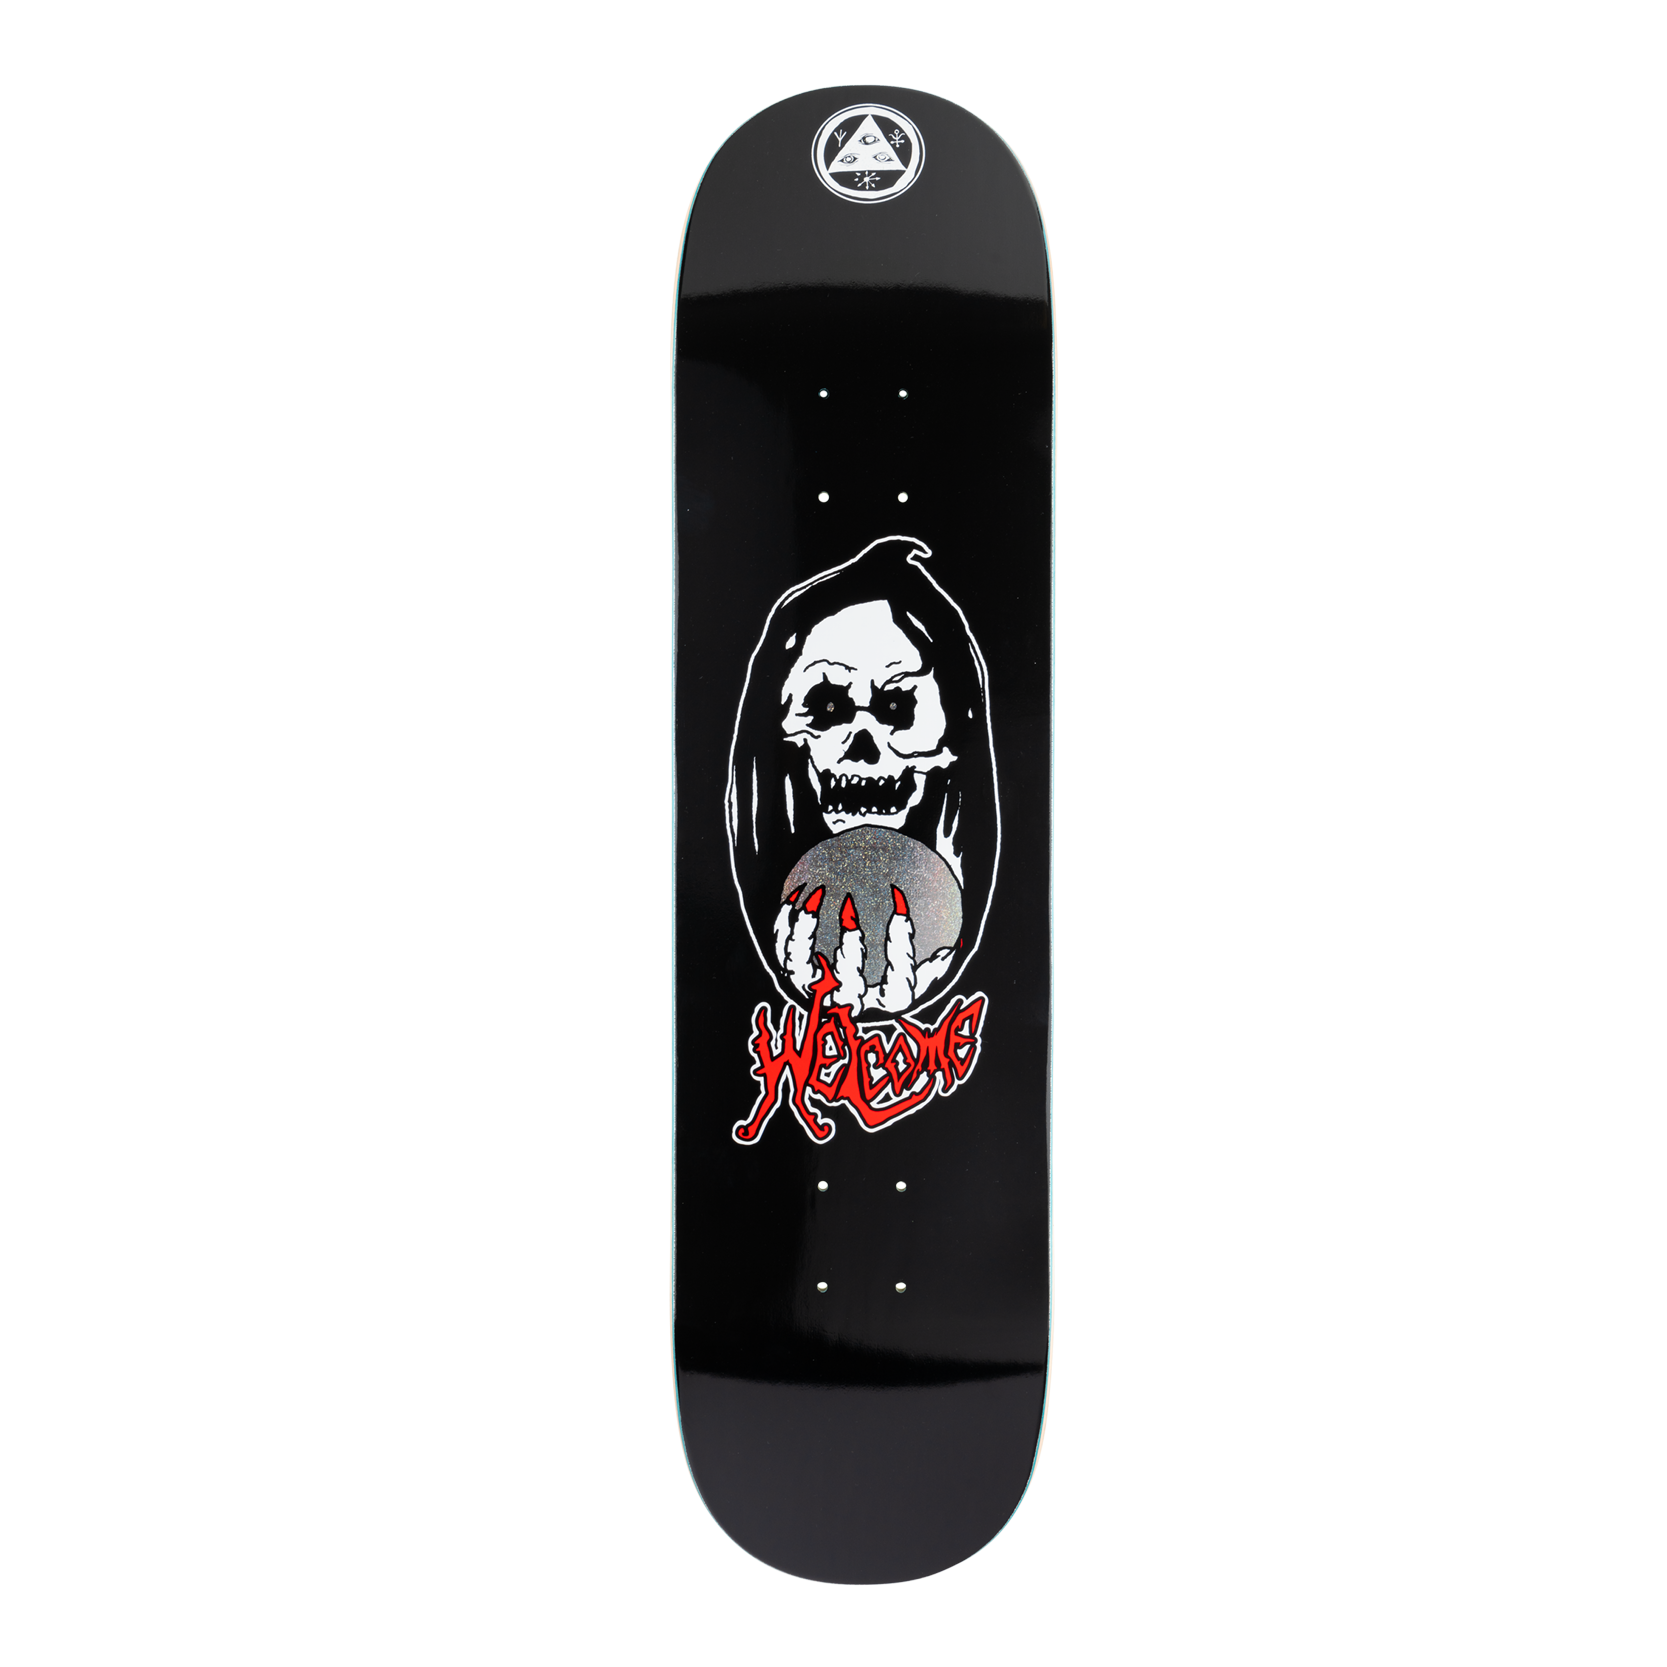 Clairvoyant on Evil Twin 800 Welcome Skateboard Deck